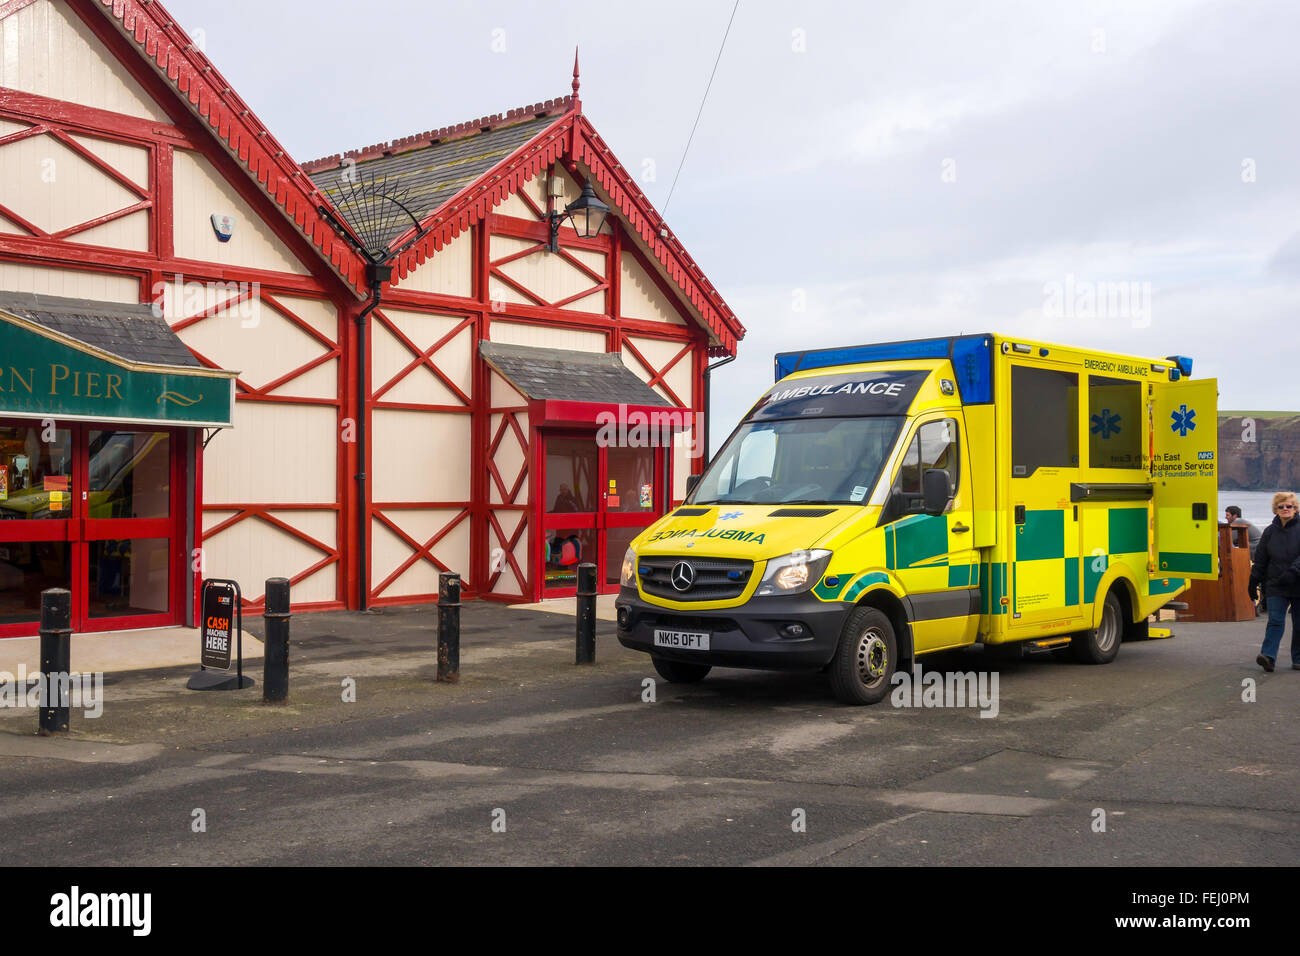 Emergency NHS ambulance on call by the pier at in Whitby UK Stock Photo